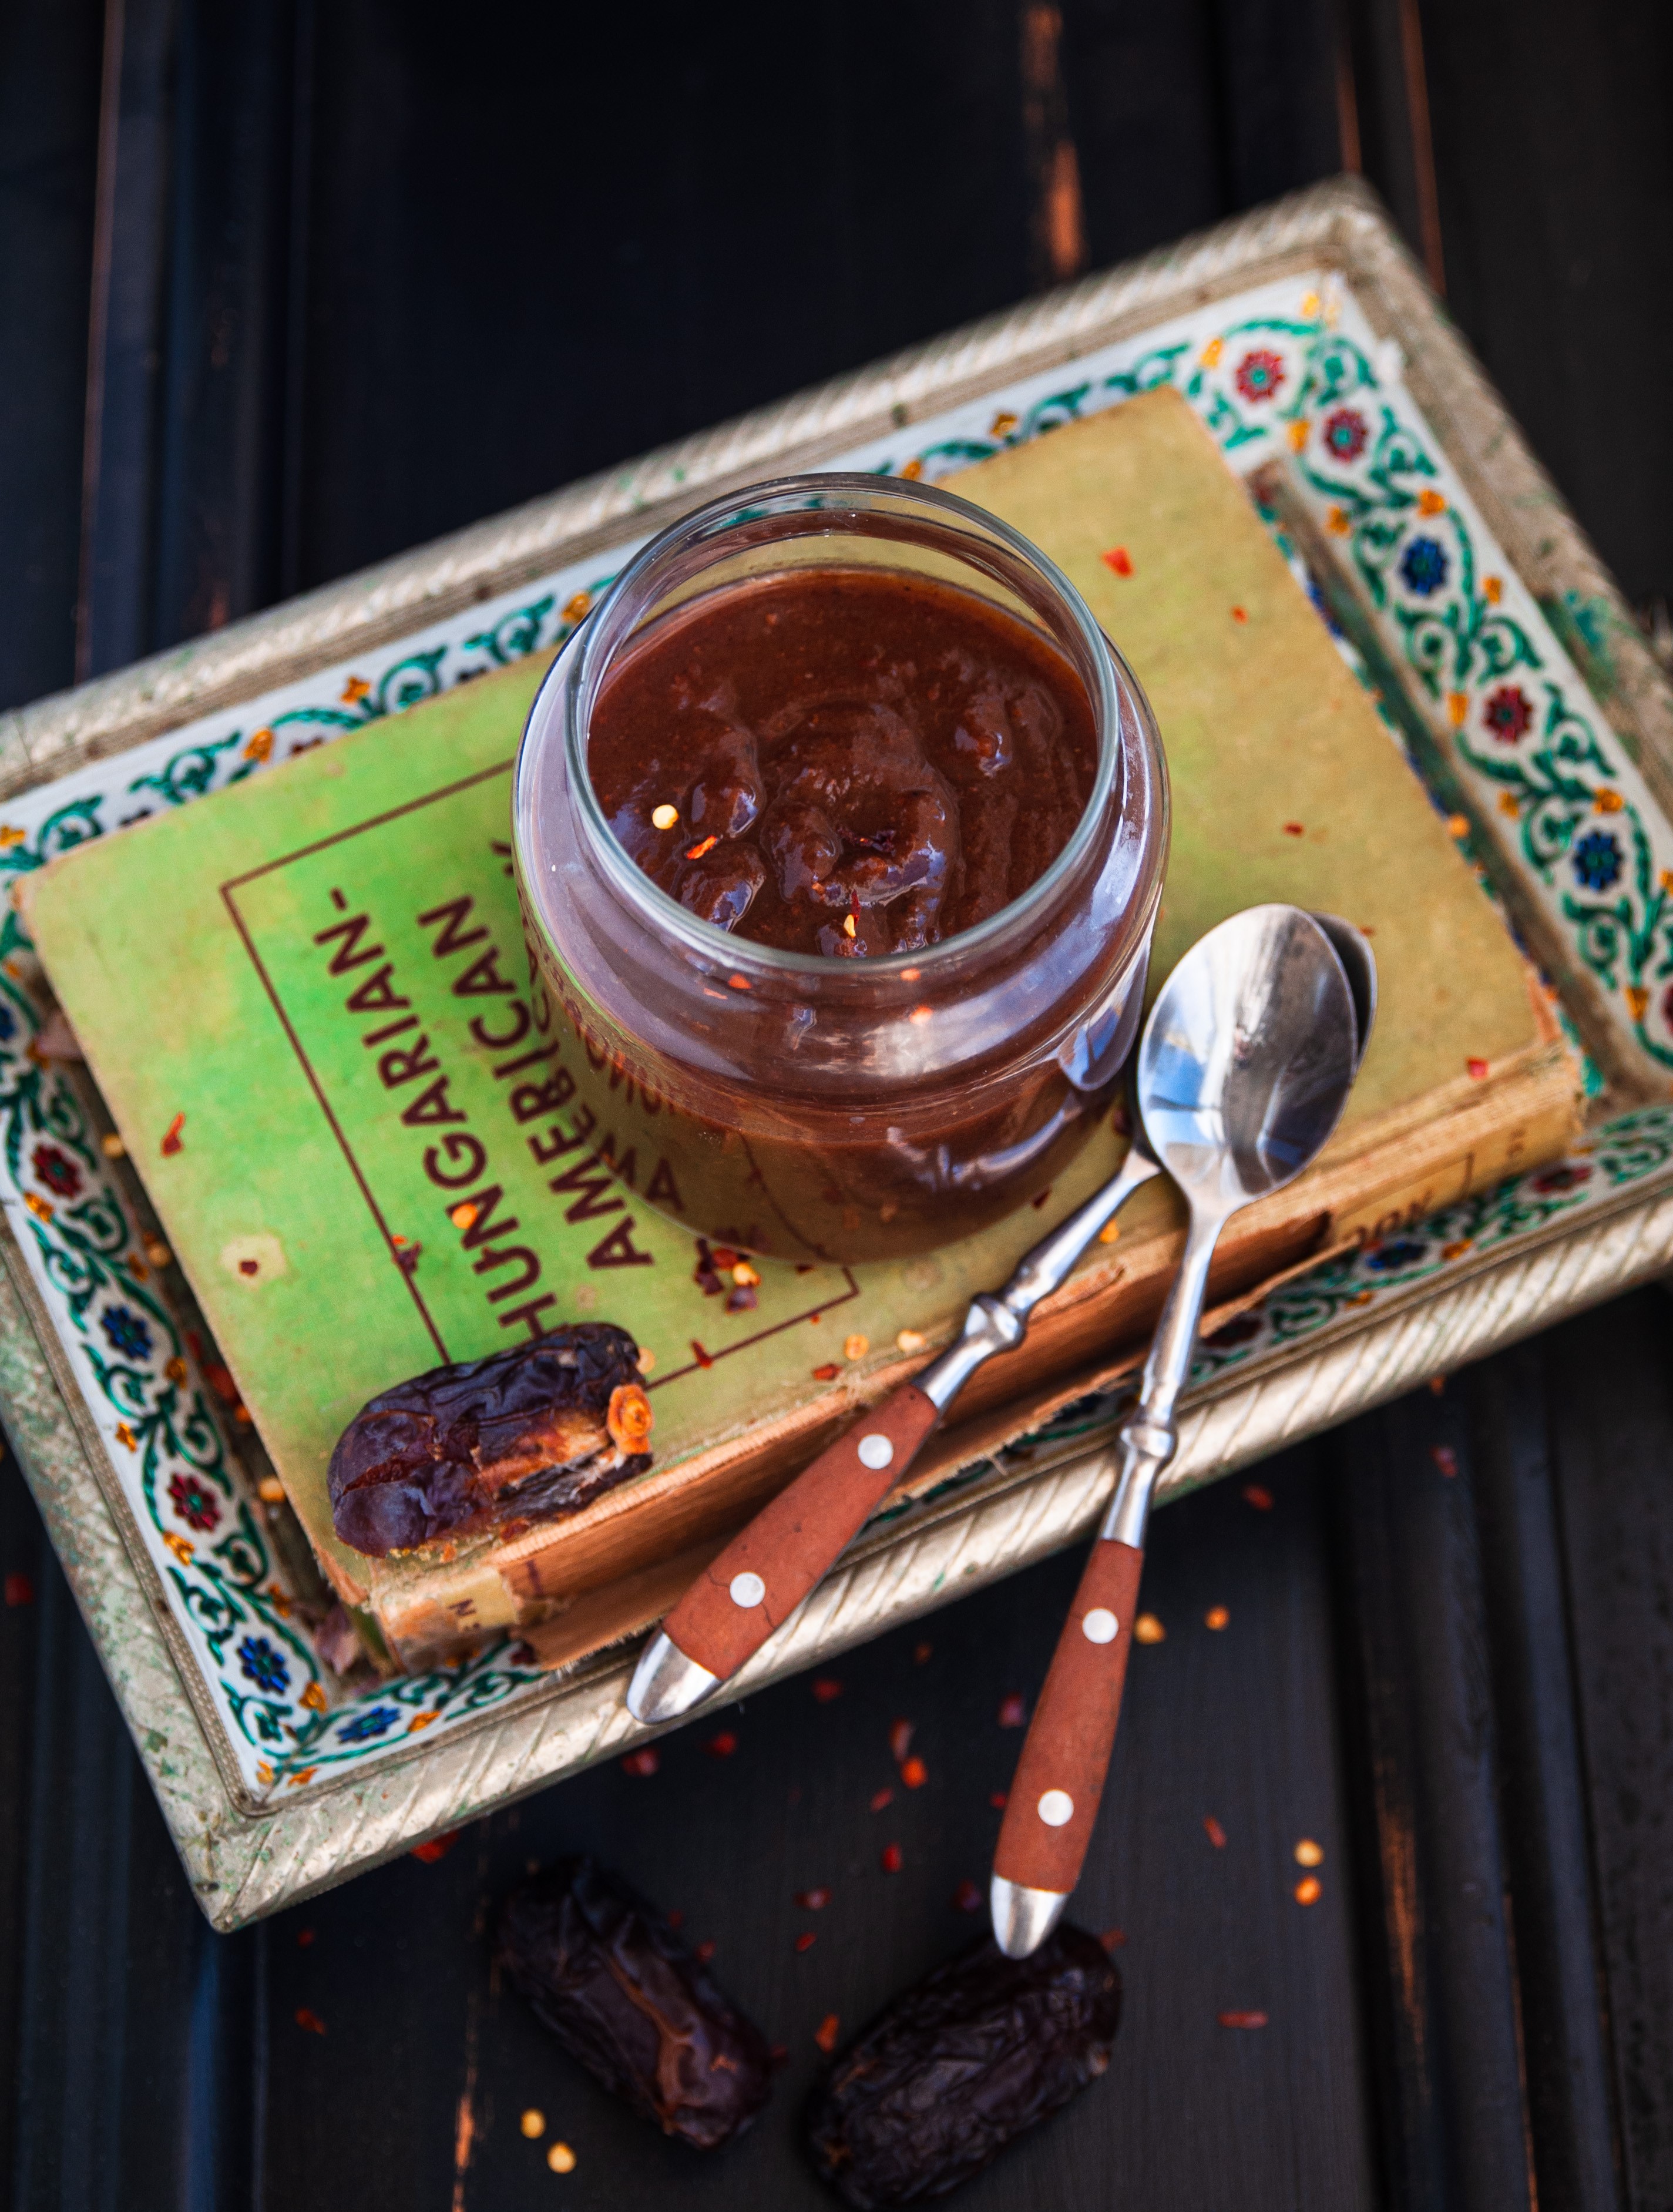 This sweet and sour tamarind chutney is made with dates and jaggery to be used as a dip for Indian street foods.